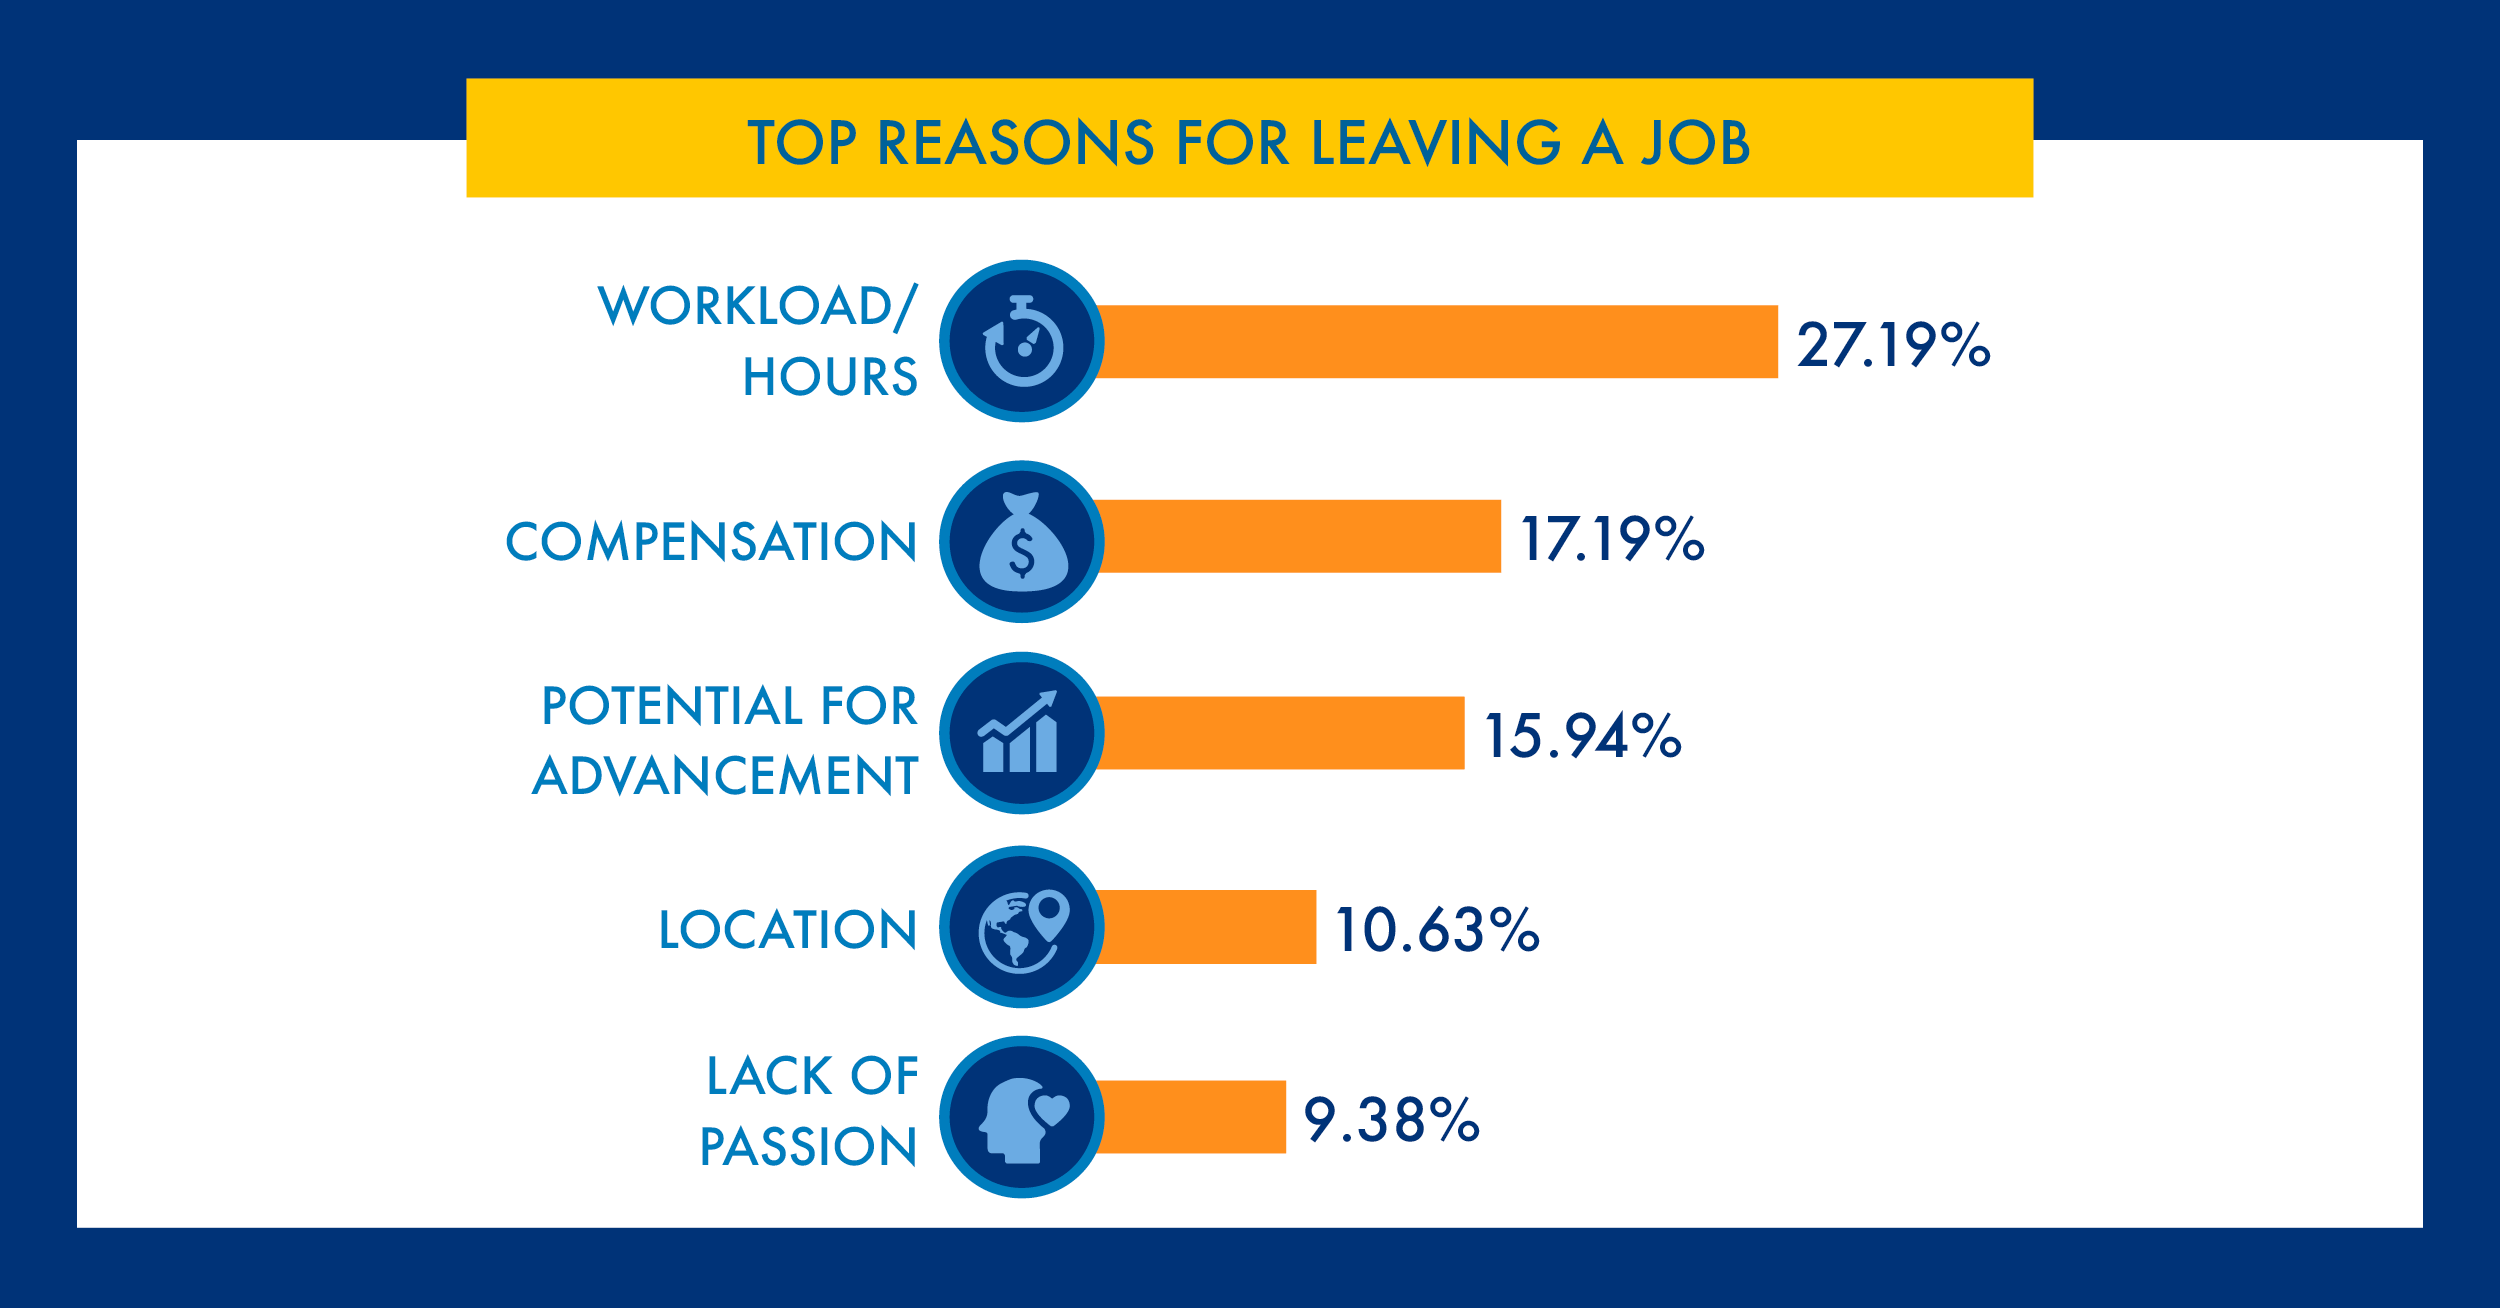 Top reasons for leaving a job